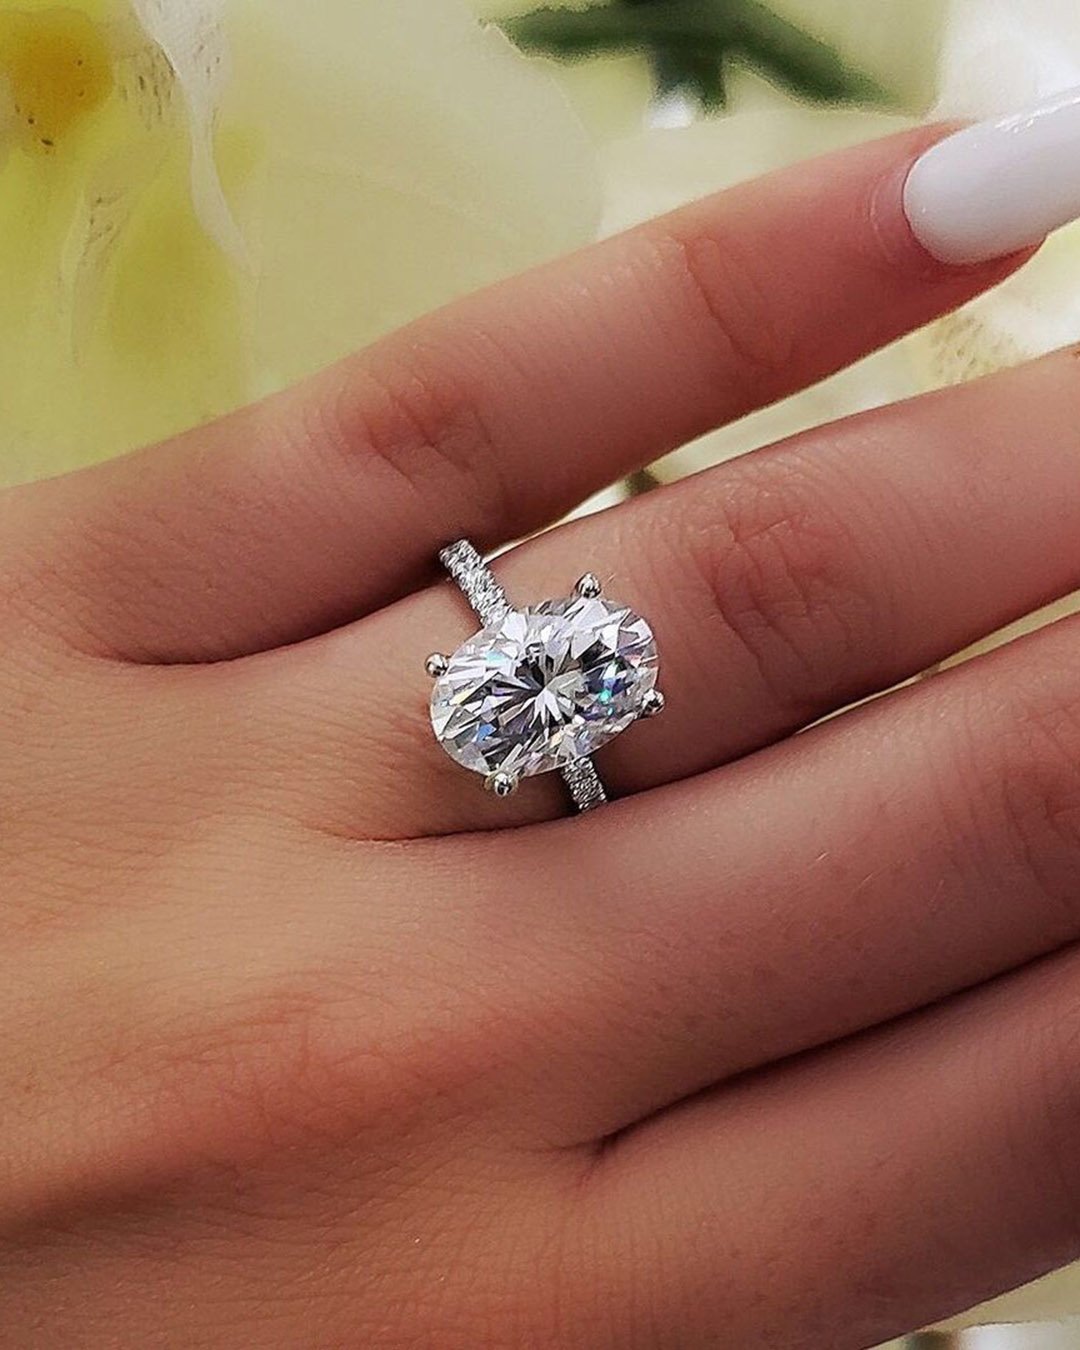 Oval Engagement Rings 39 Amazing Ring Ideas To Get More